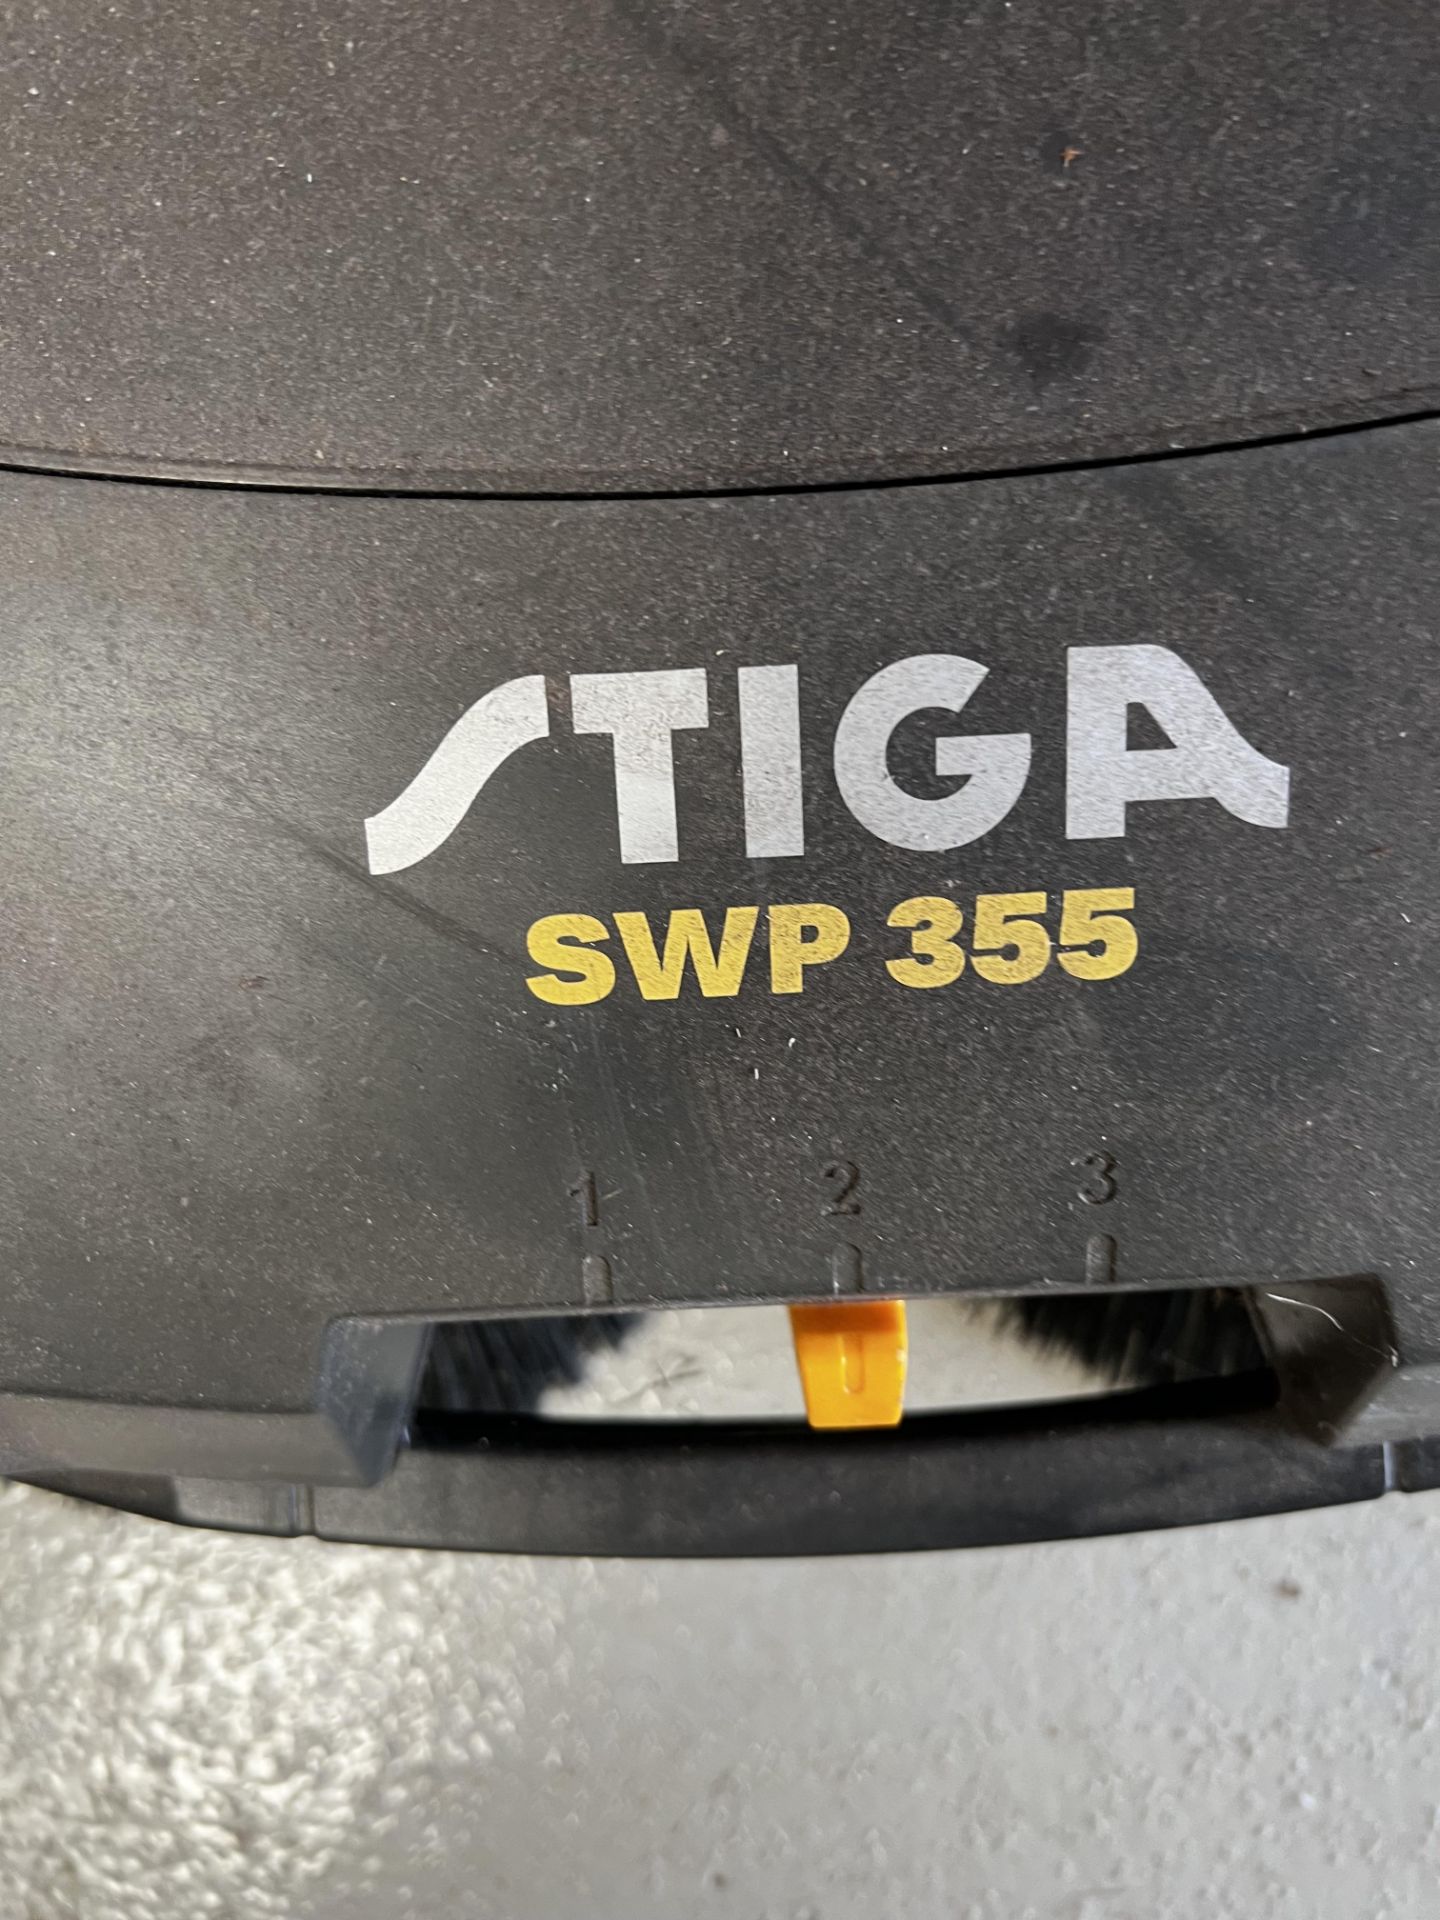 Stiga SWP 335 sweeper manual (This lot is located in Plympton) - Image 2 of 3